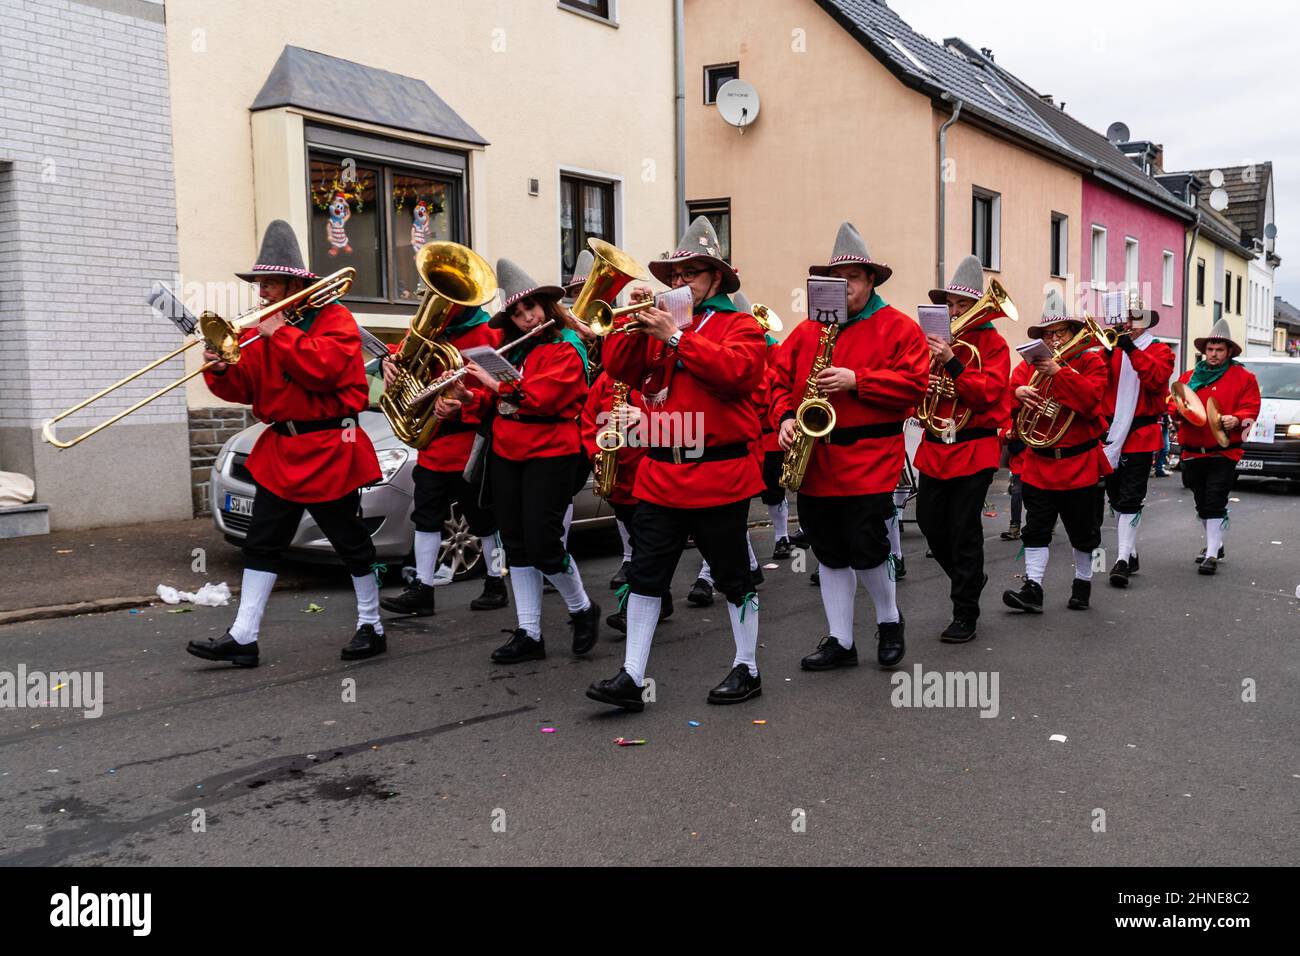 Bornheim, North Rhine-Westphalia, Germany - February 22, 2020: Brass band playing traditional carnival music and marching in red costumes at a parade. Stock Photo